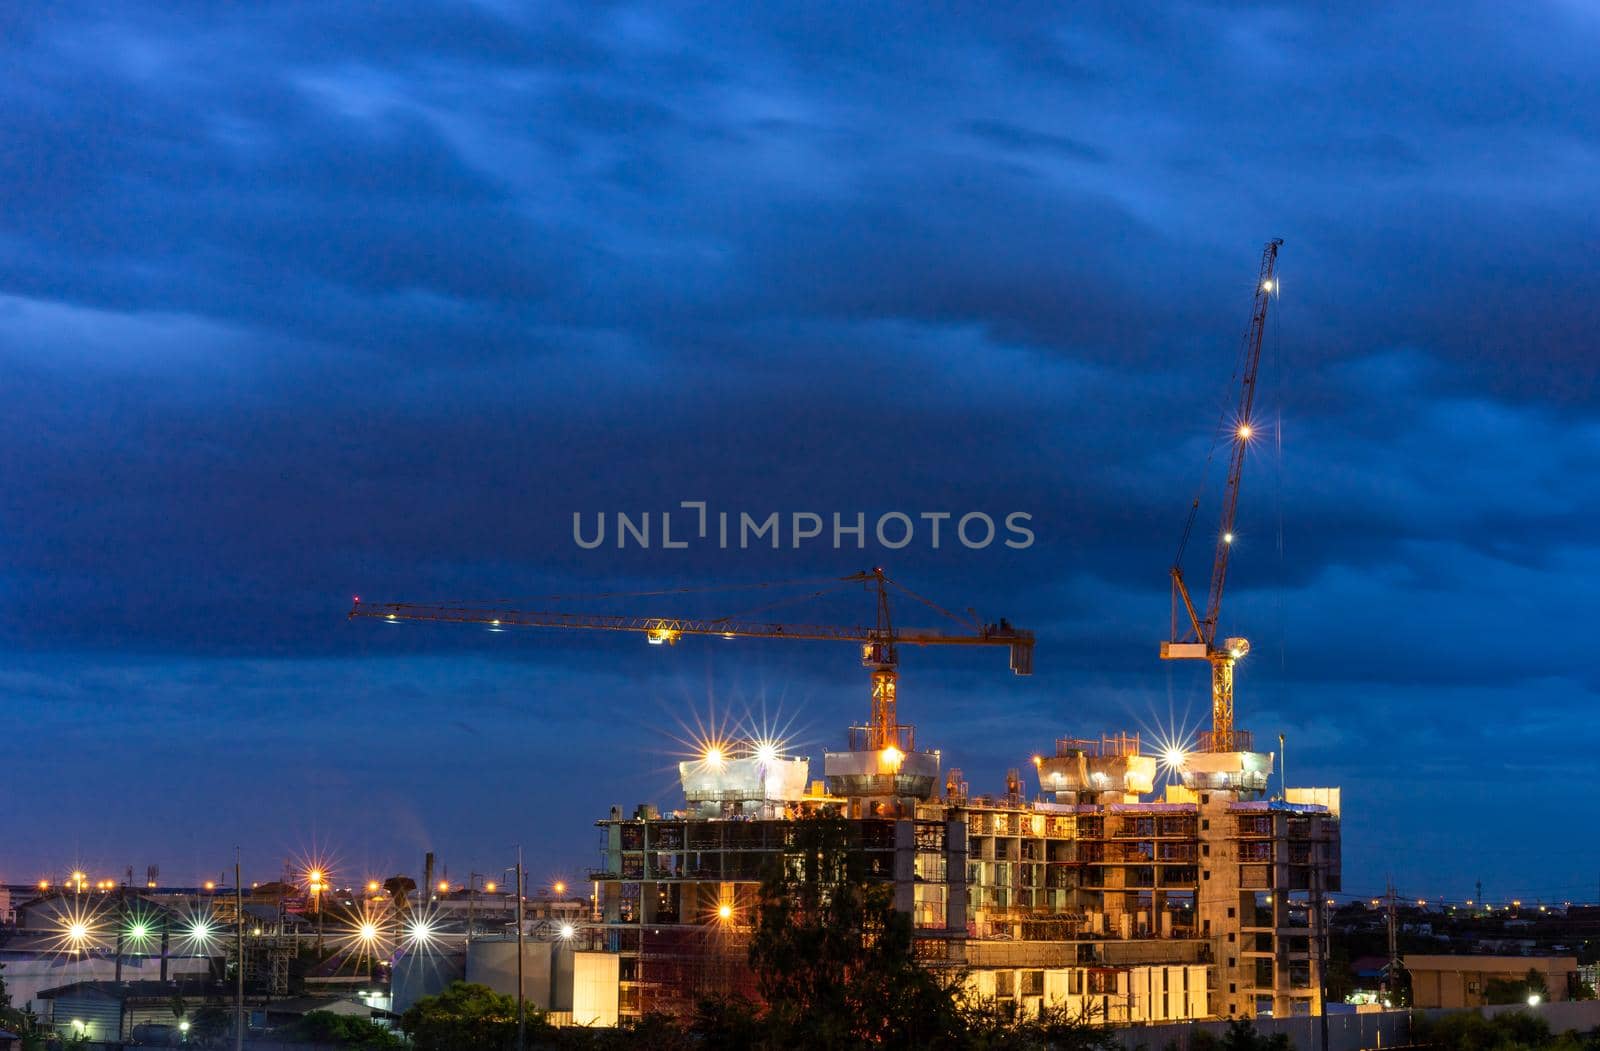 Construction site with cranes in night by domonite